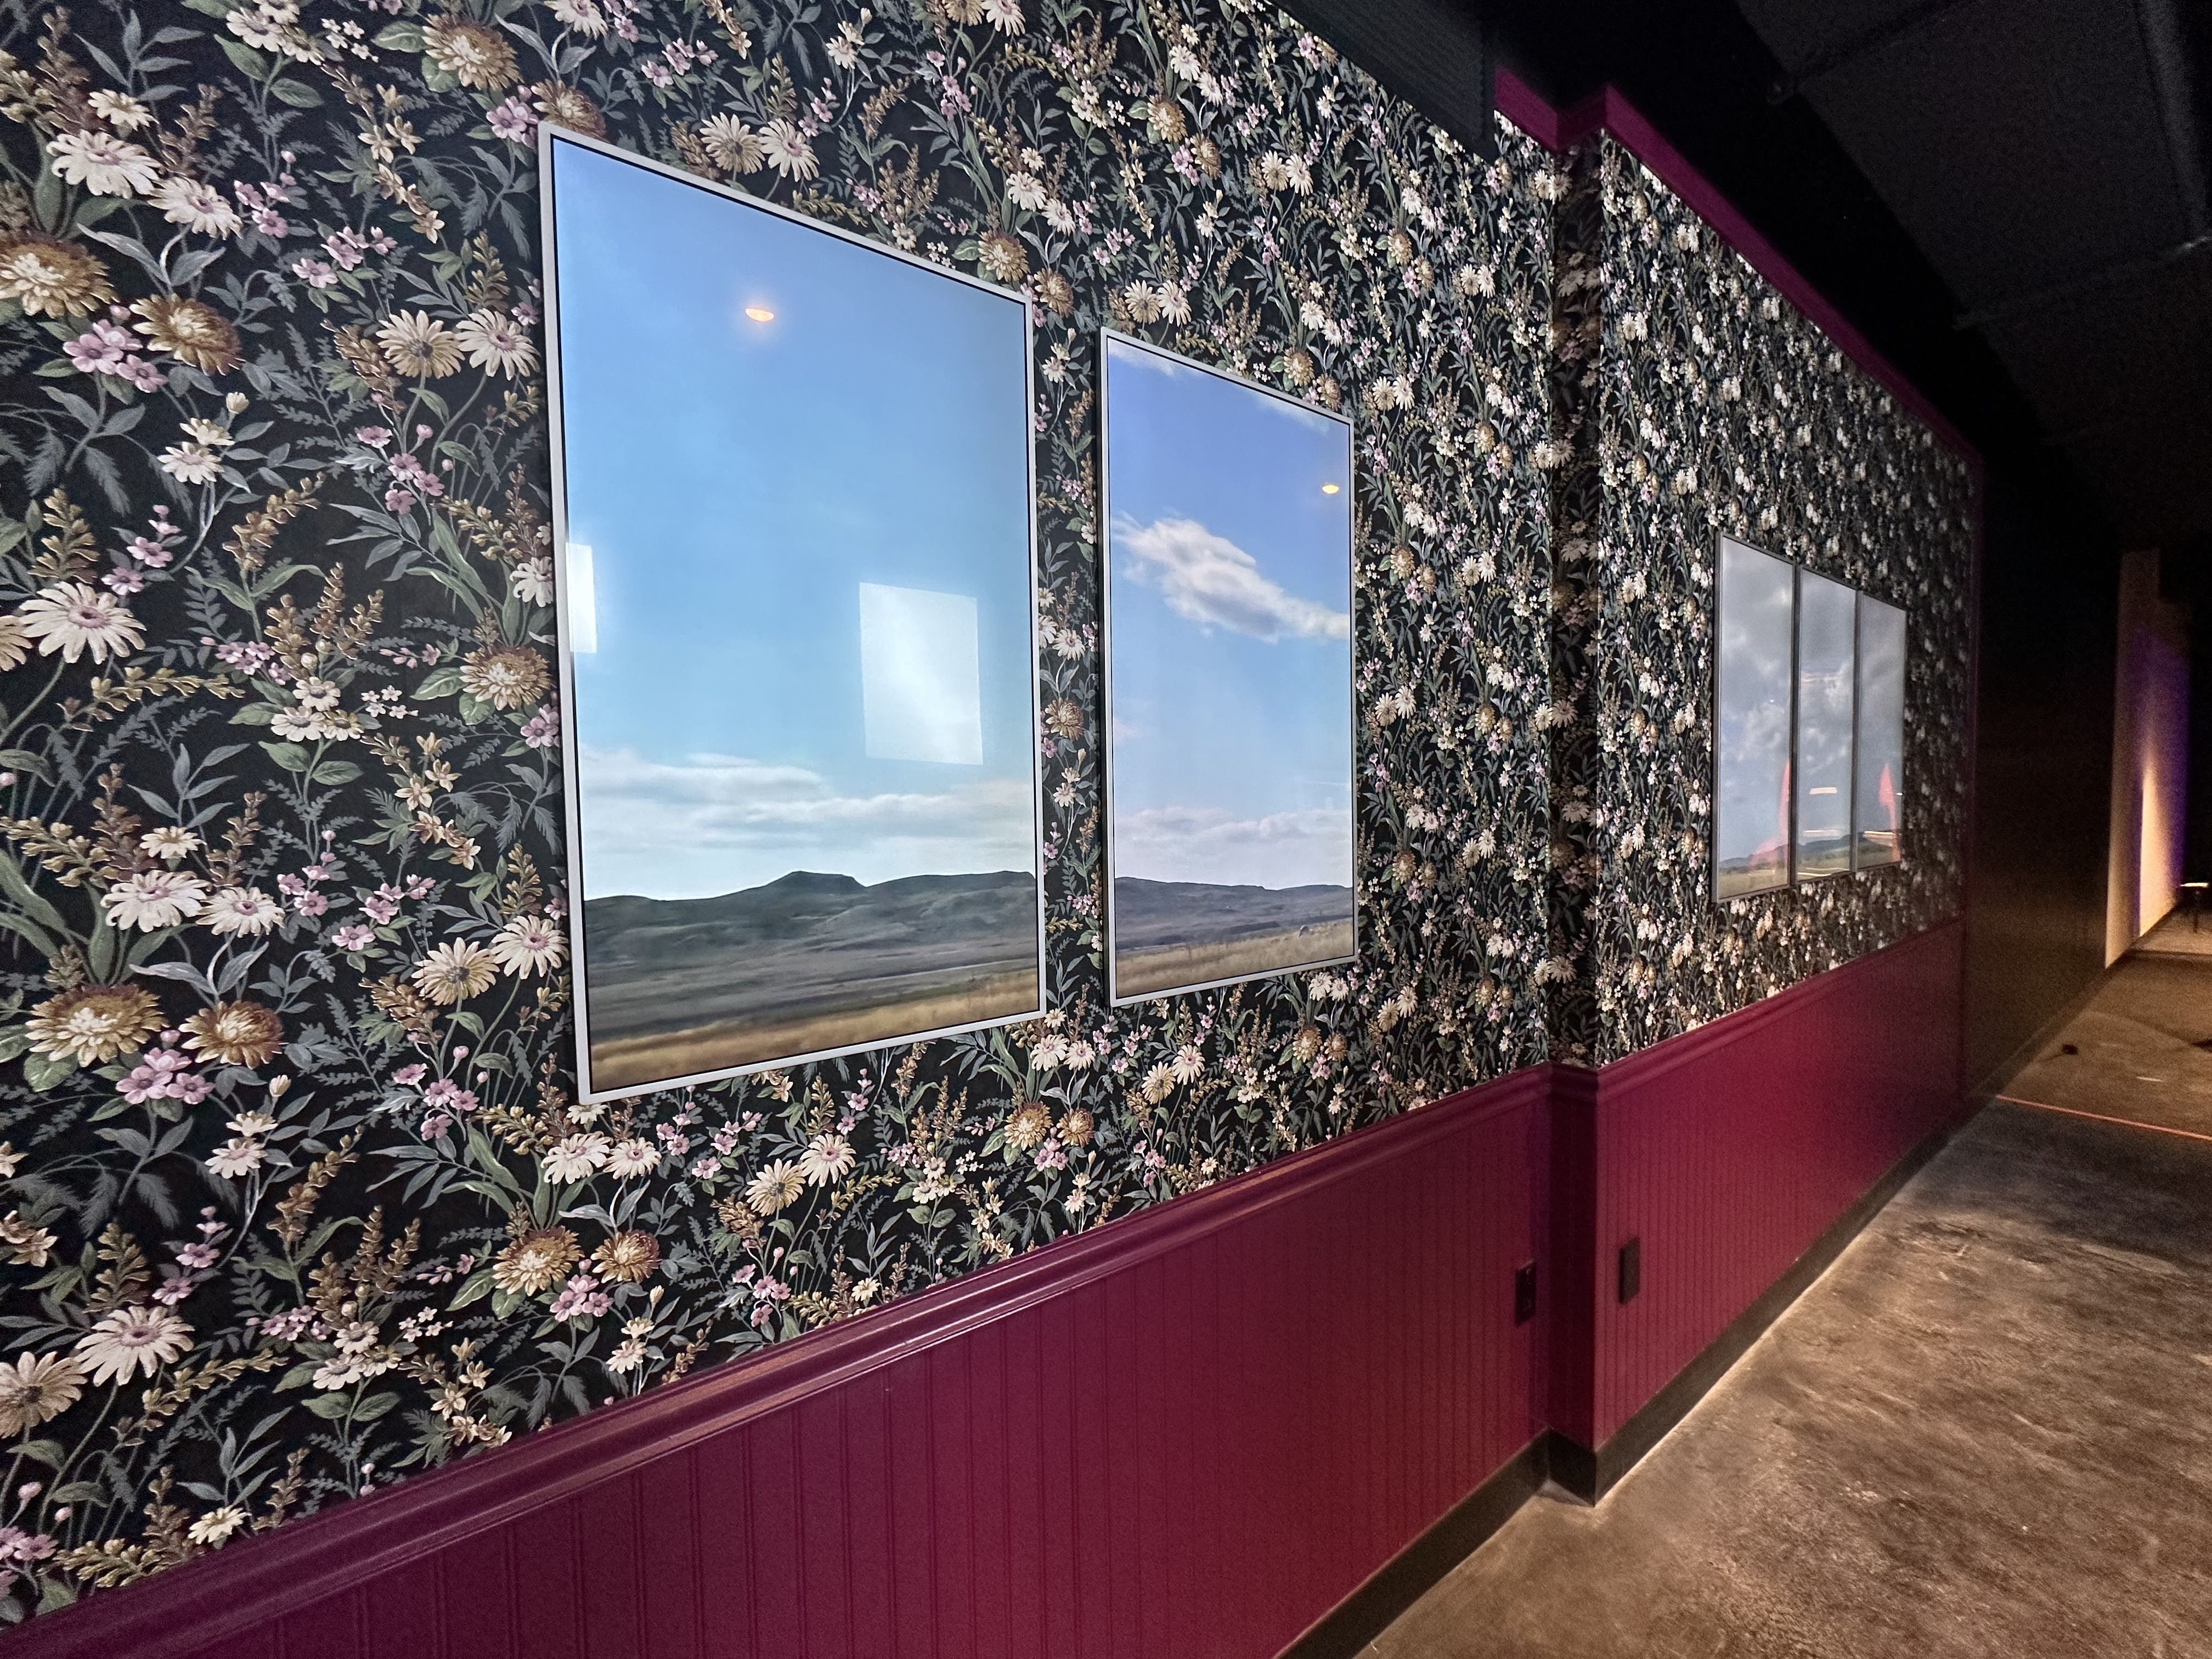 Computer panels appear as windows showing a field on a partly cloudy day in the "living gallery" of the WNDR Museum in Boston.